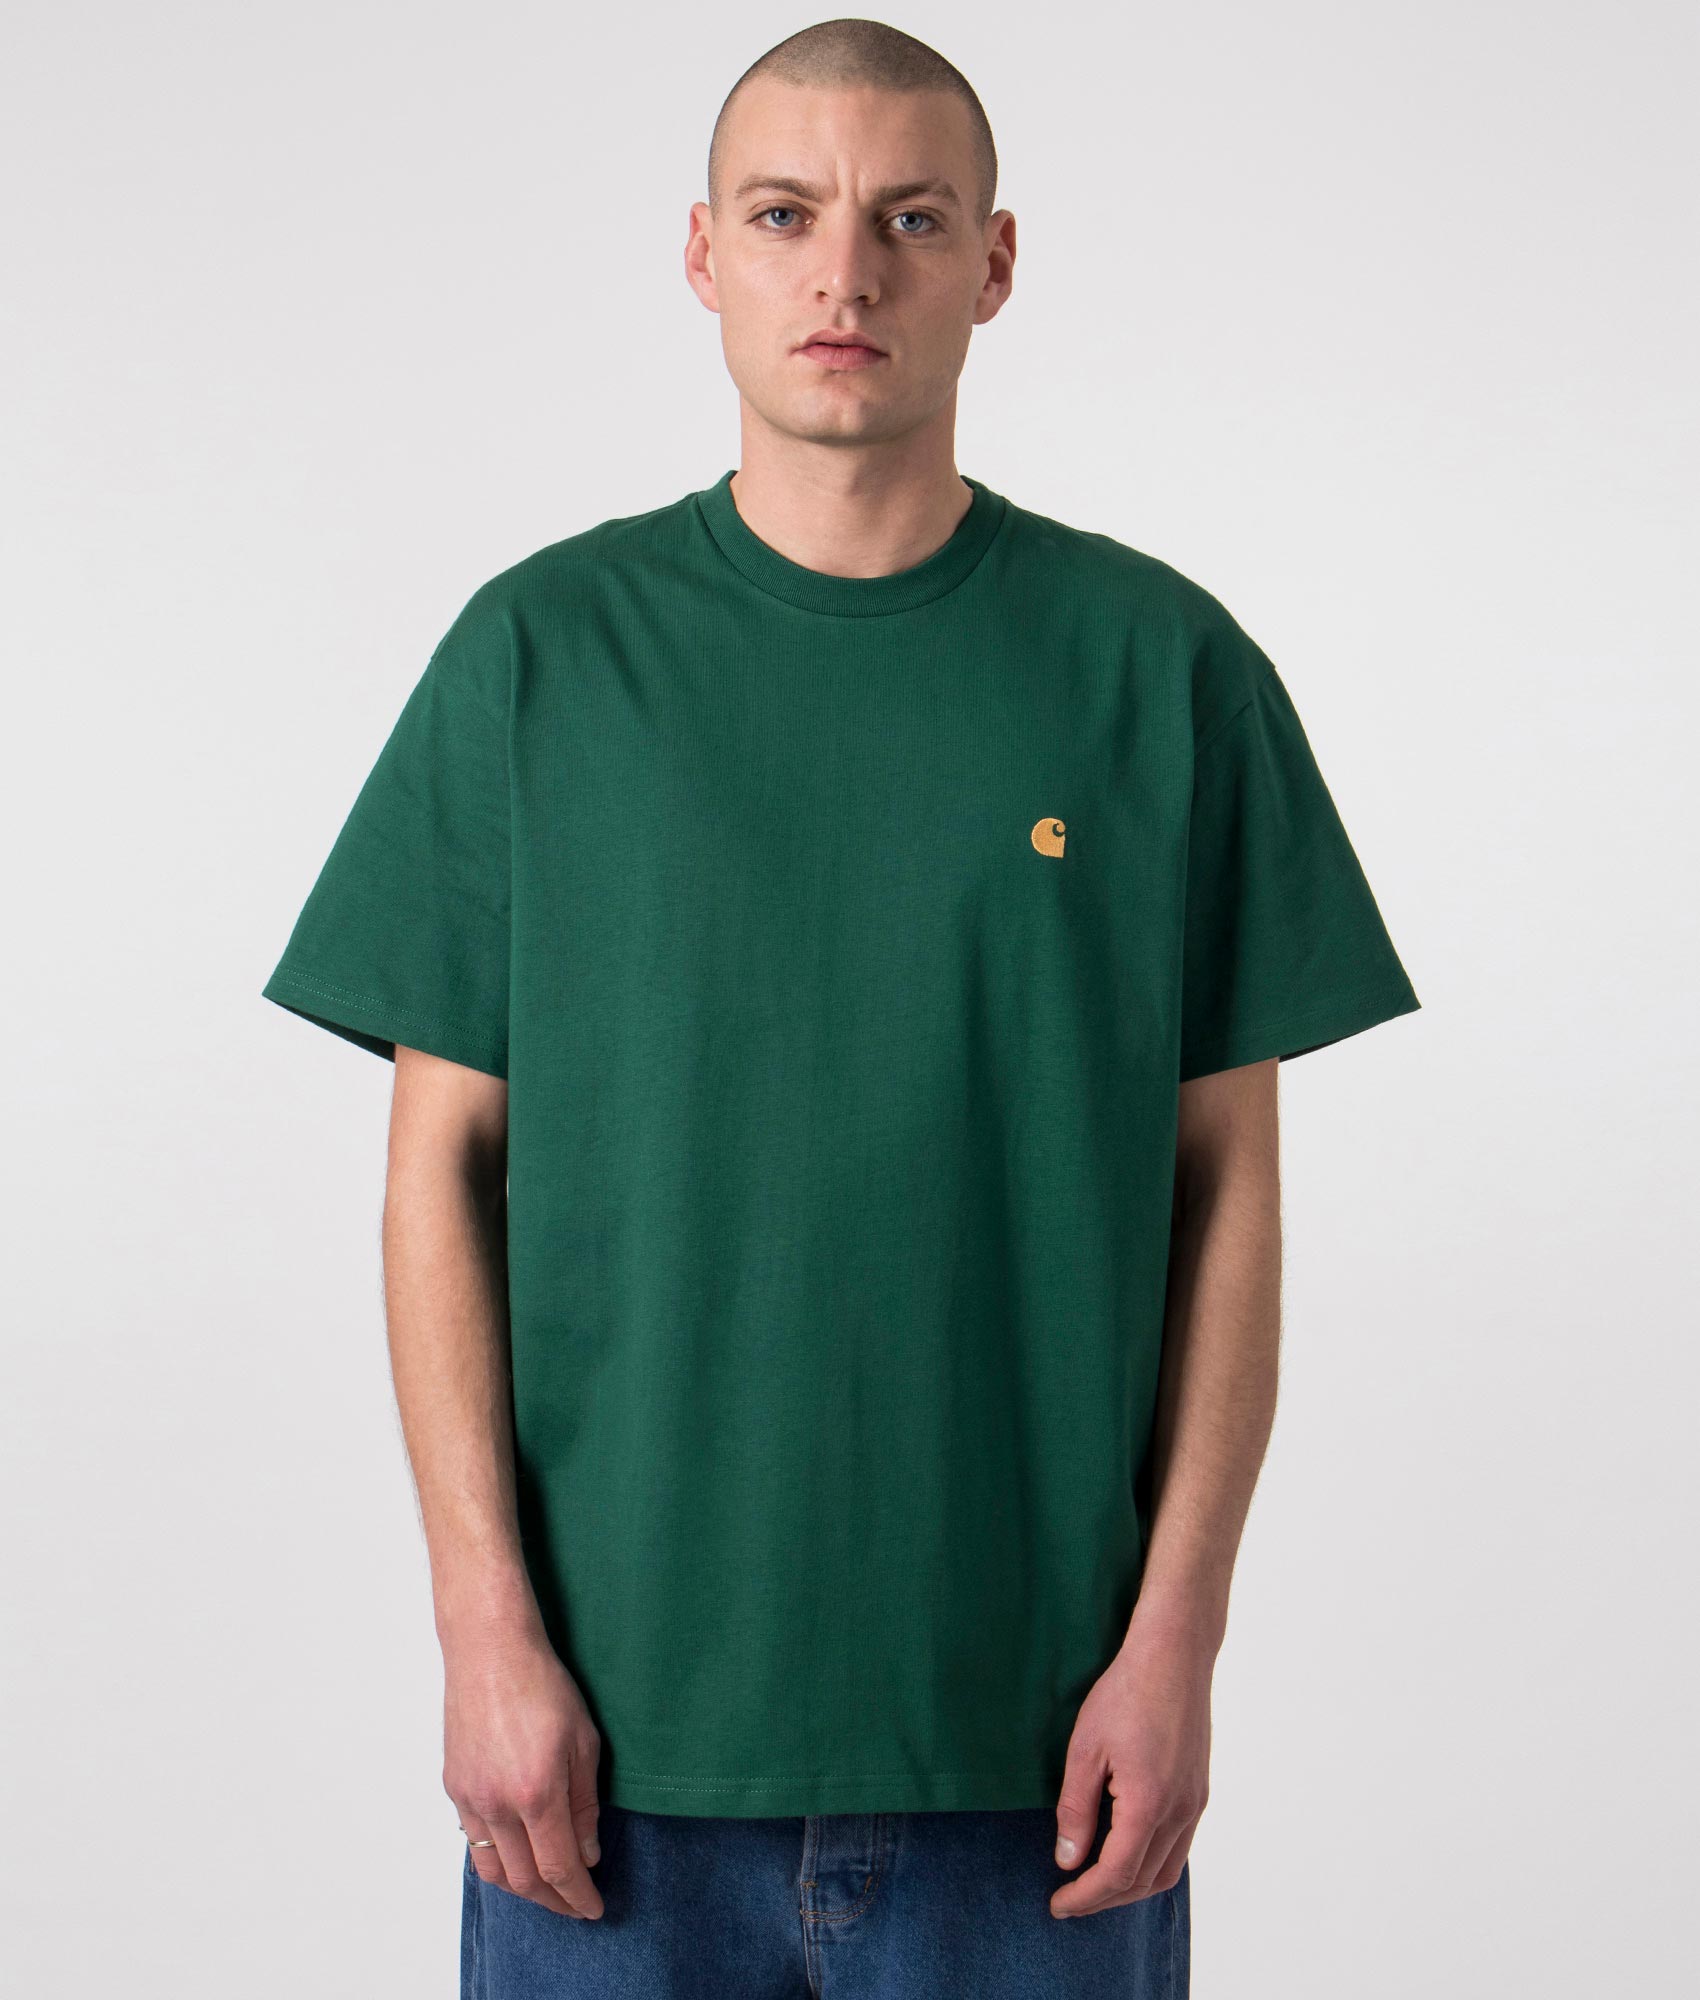 Carhartt WIP Mens Relaxed Fit Chase T-Shirt - Colour: 1YWXX Chervil/Gold - Size: Medium